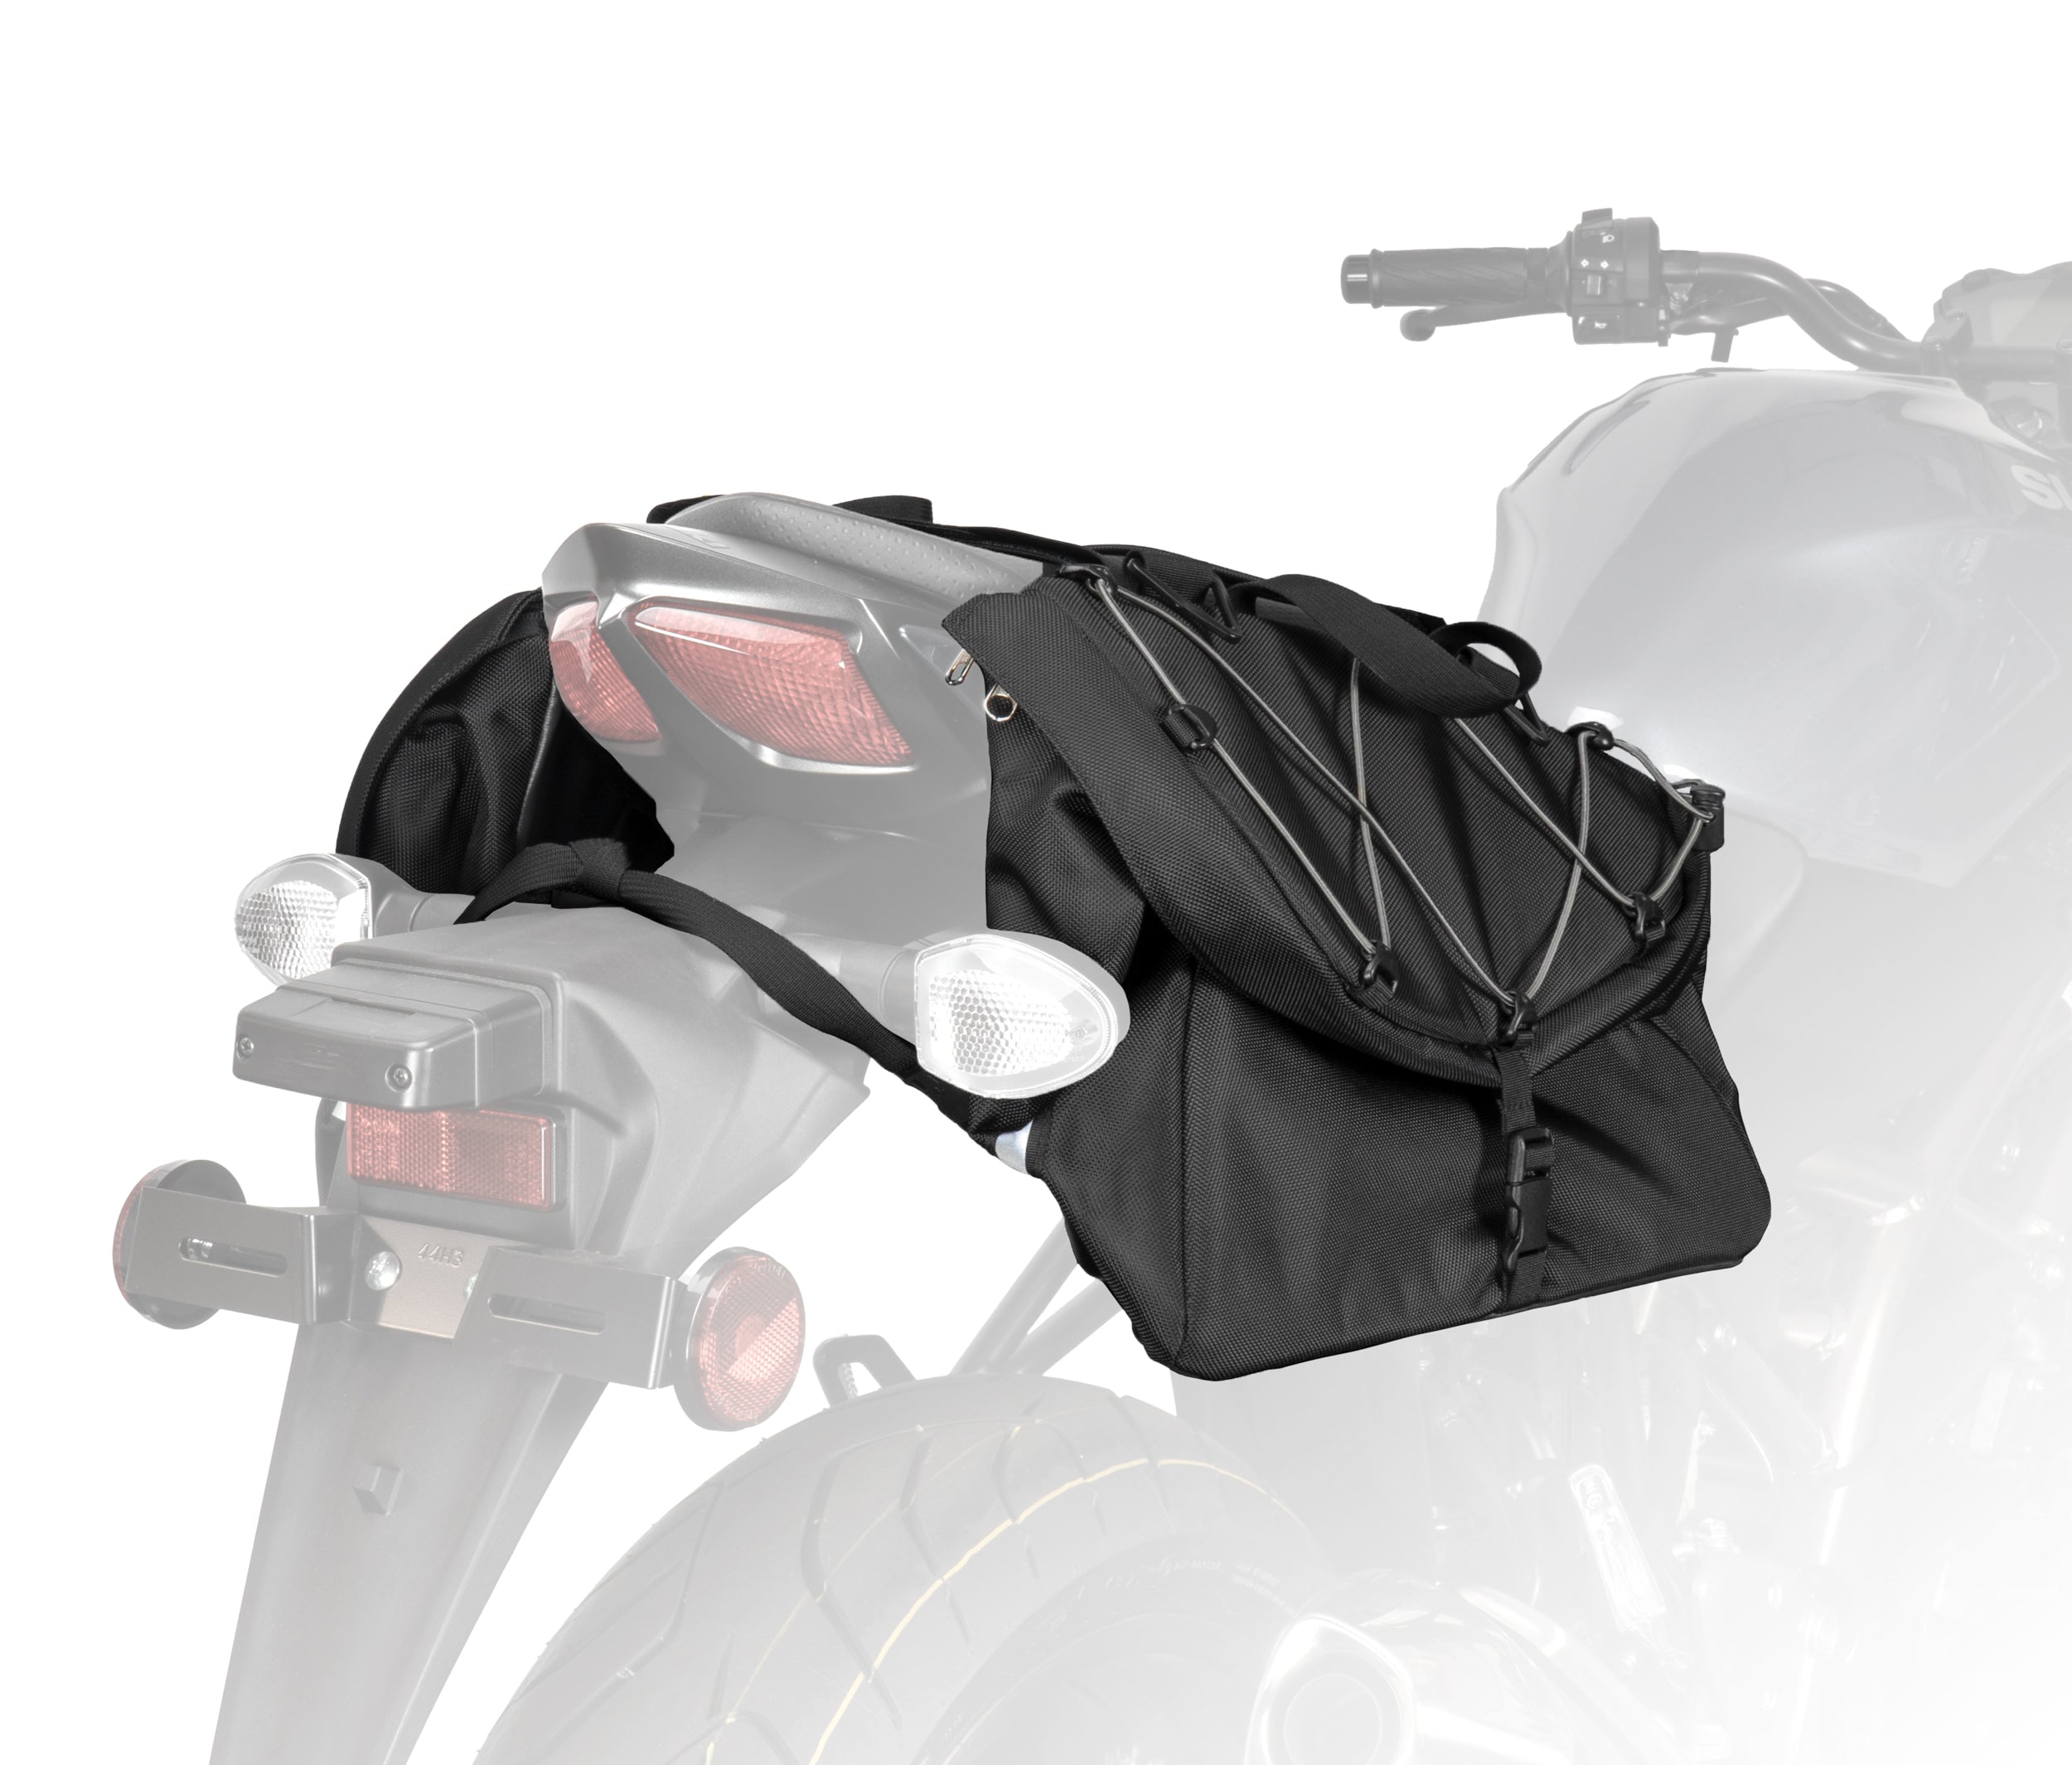 24 Saddlebags That Are Chic and Functional and Don't Break the Bank